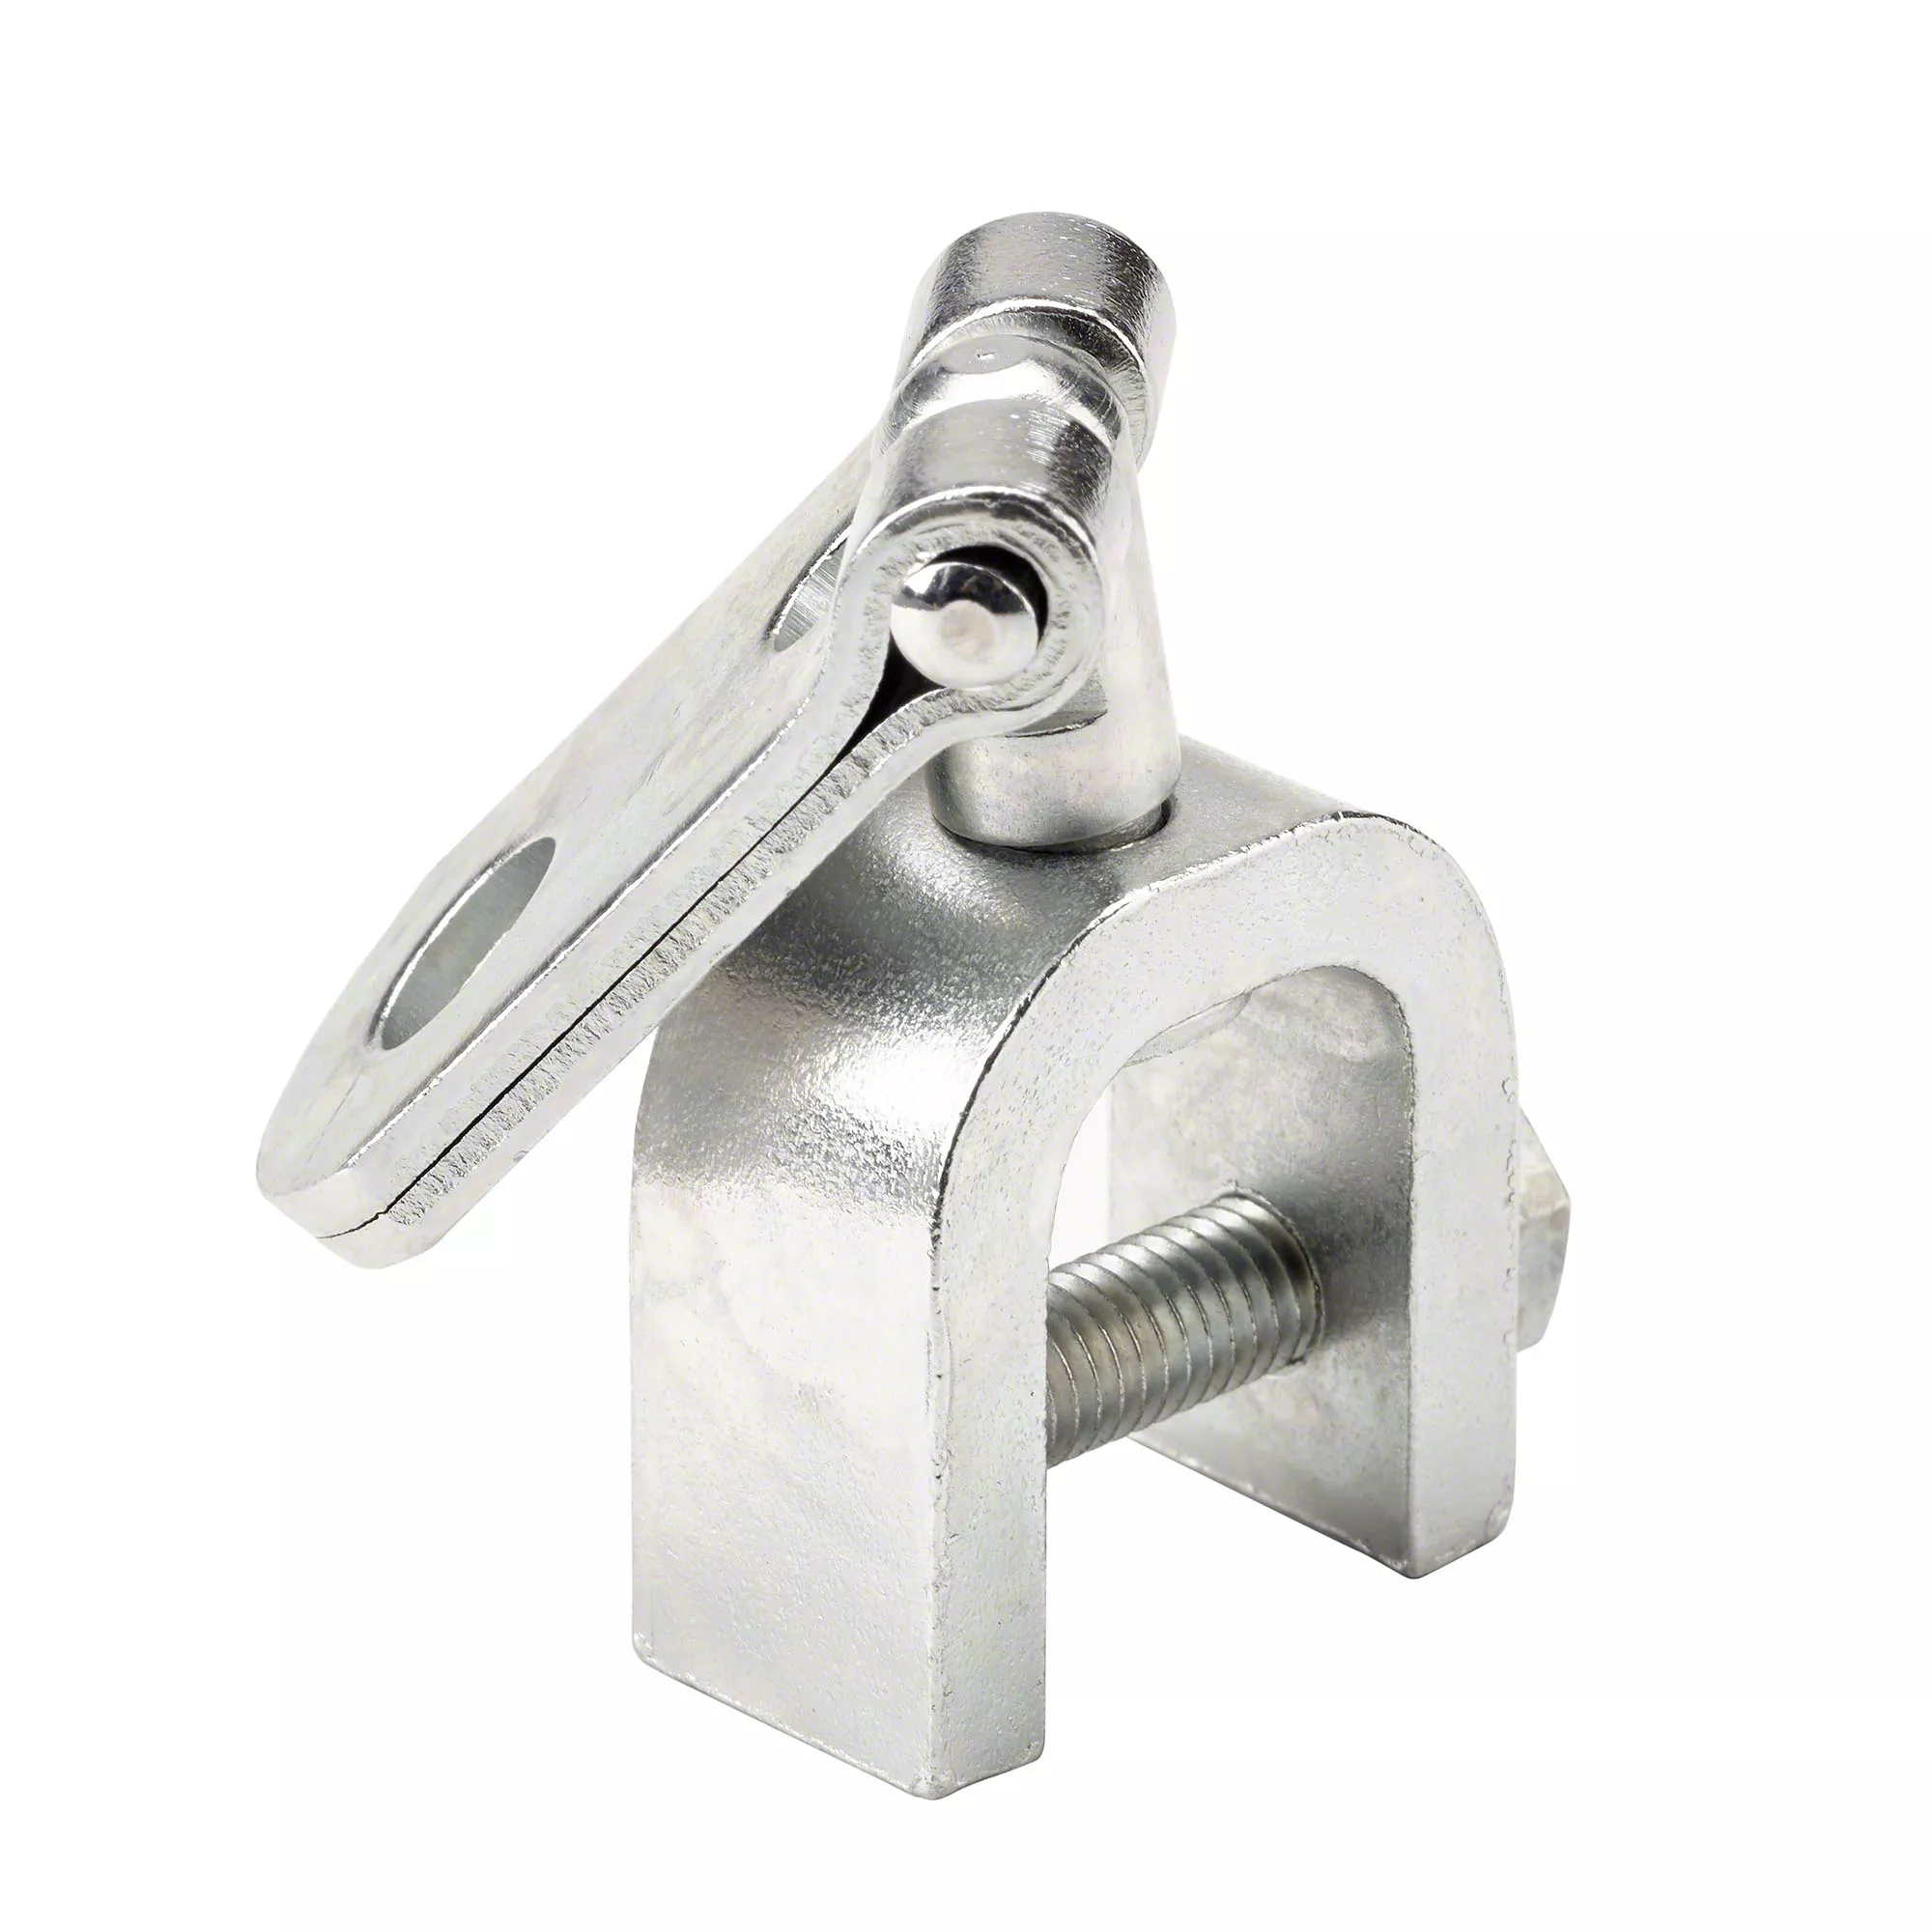 Fixed clamp with joint - for valve extension, with joint